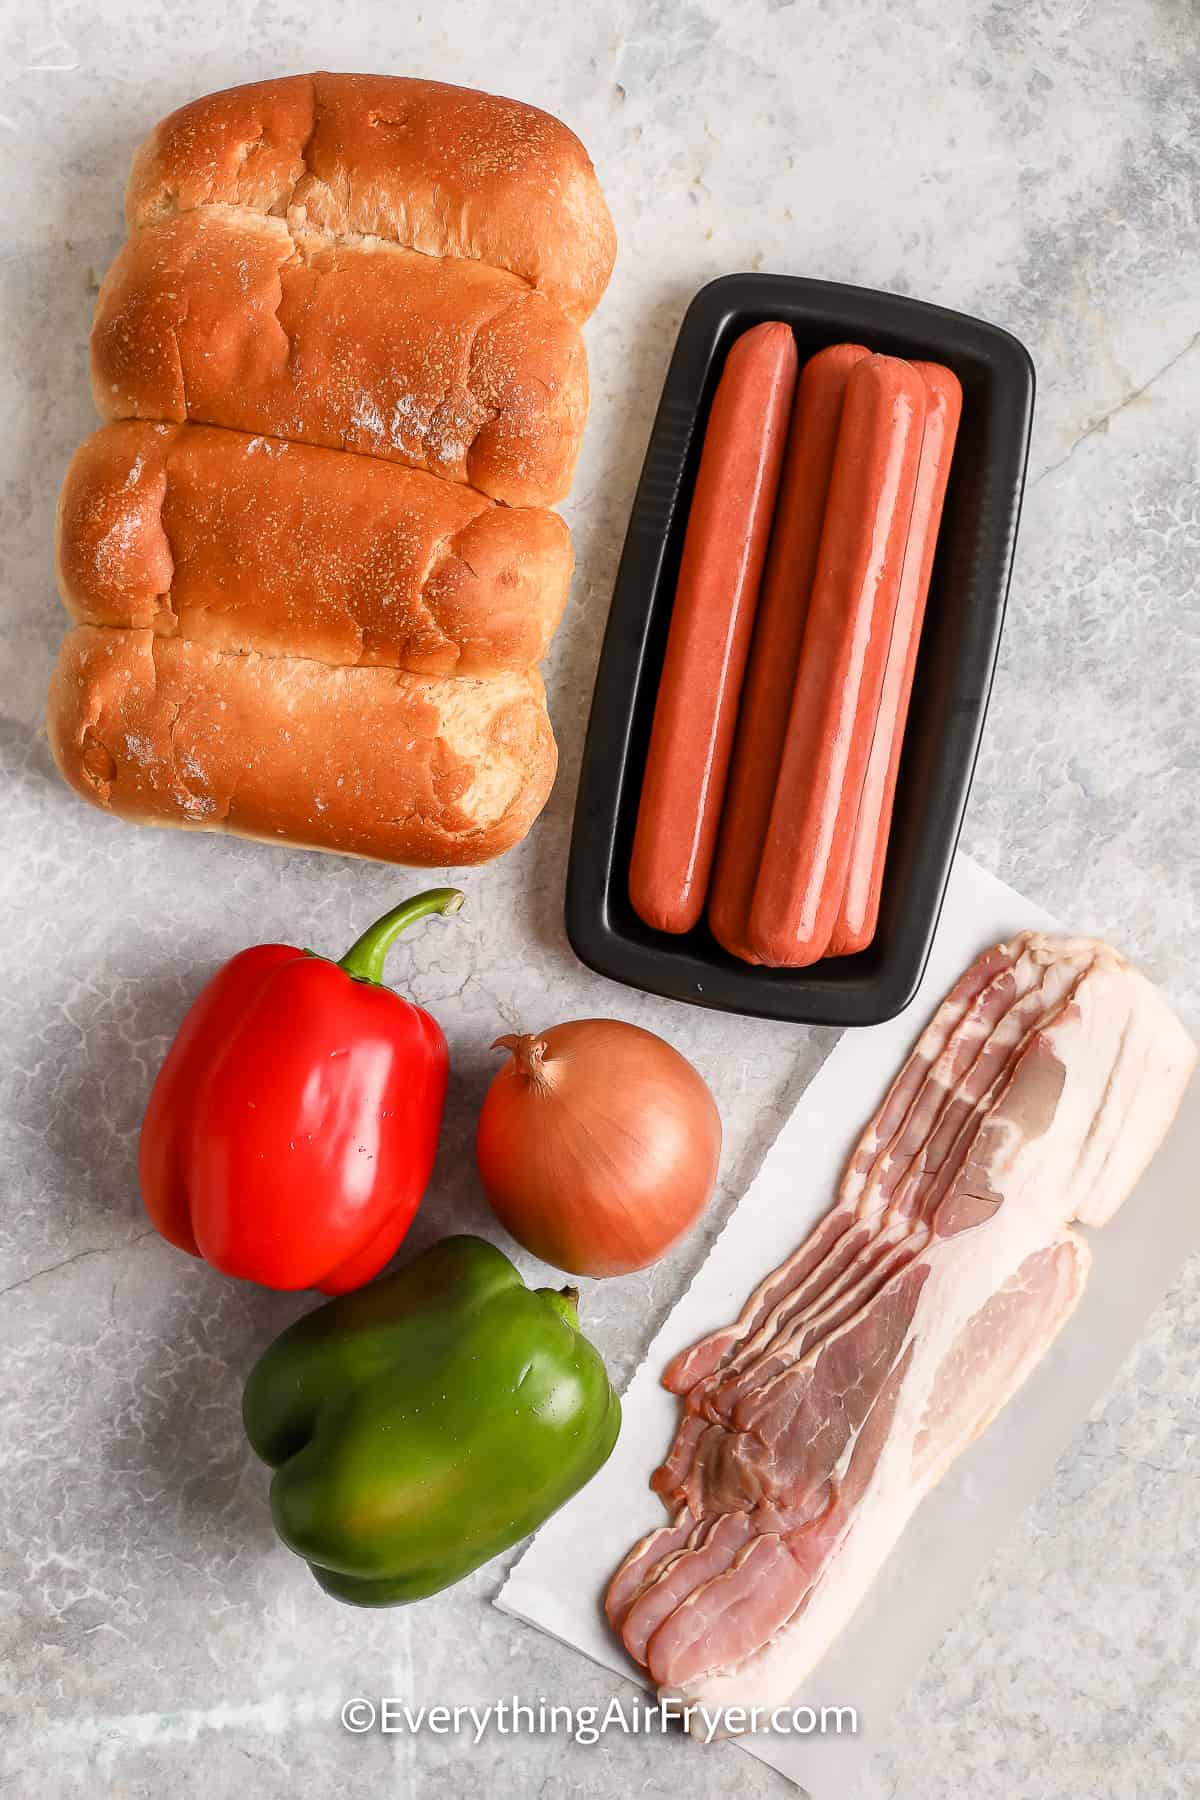 Ingredients for Street Hot Dogs